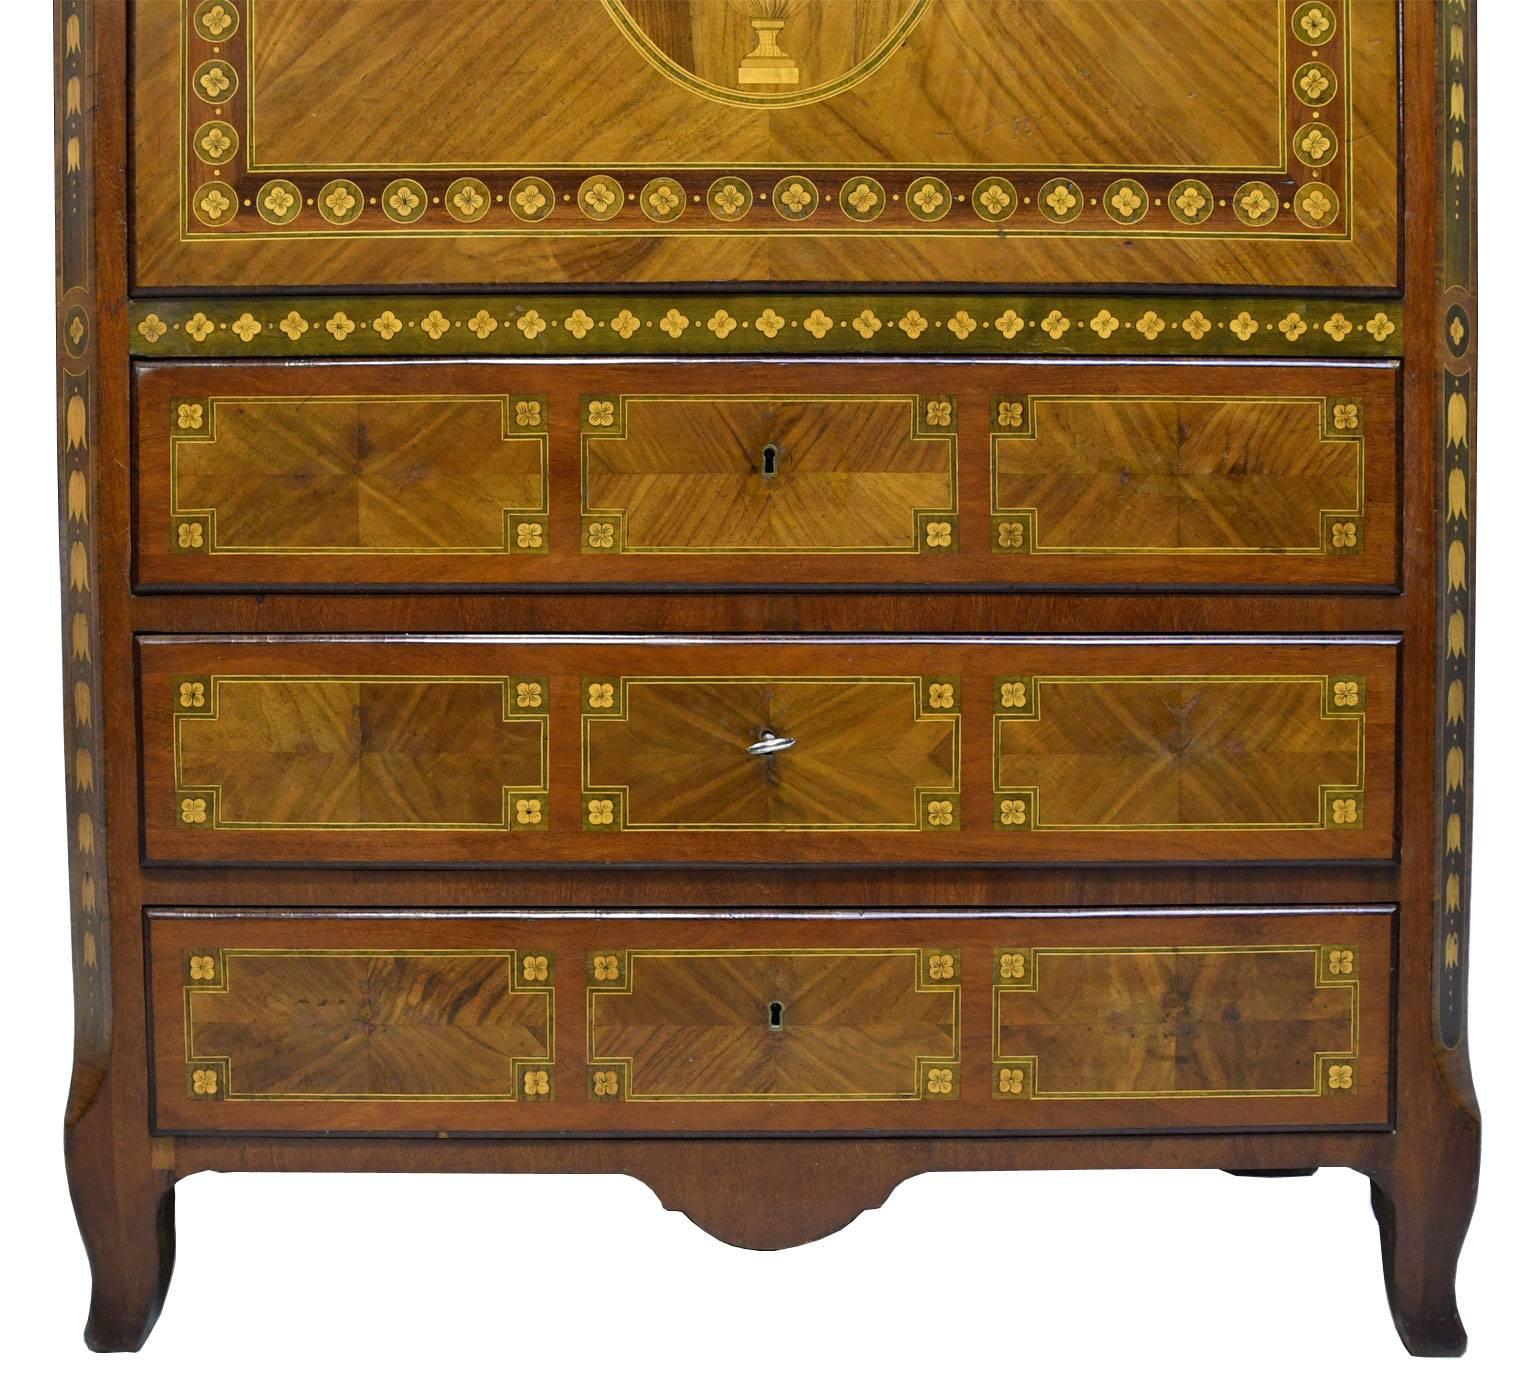 19th Century Spanish Charles IV Secretary with Contrasting Marquetry over Mahogany, c. 1800